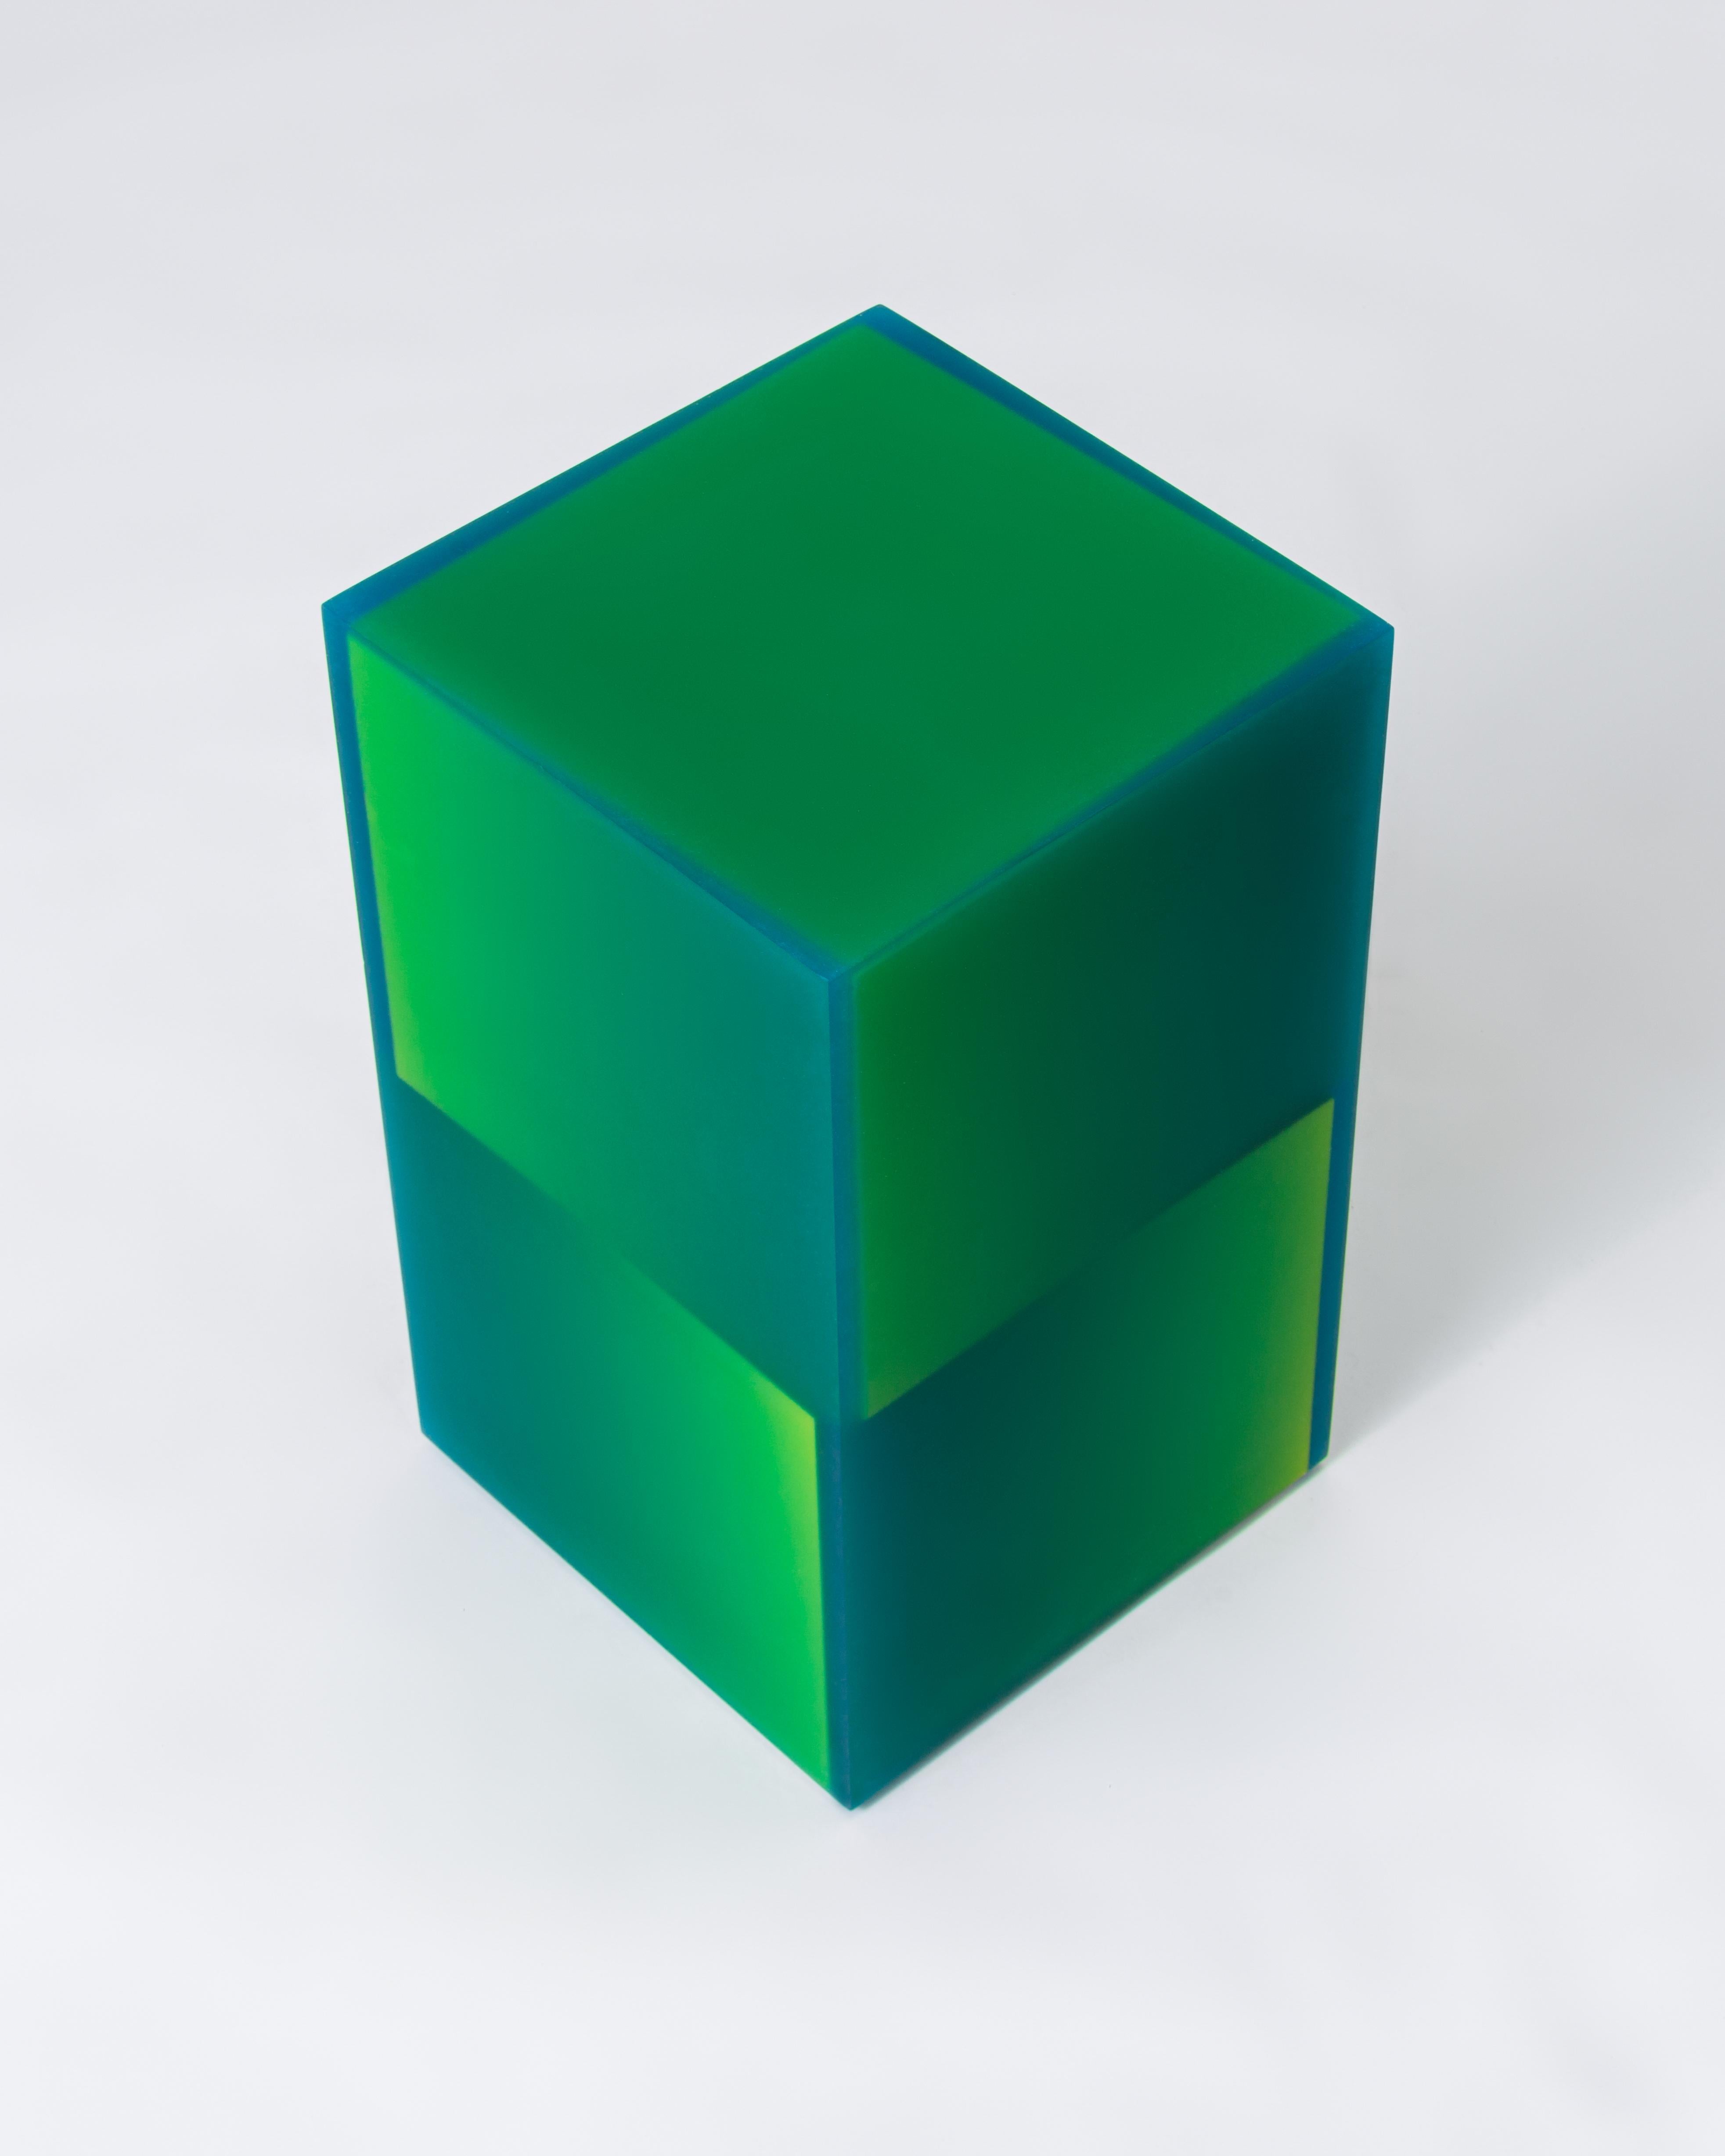 Two Way Shift Box by FACTURE STUDIO

Resin, wood
20 × 12 × 12 in
50.8 × 30.5 × 30.5 cm

Multi-layer side table in single or multi-color options. Utilizing a medley of gradual saturation shifts in different directions, the effects in this piece